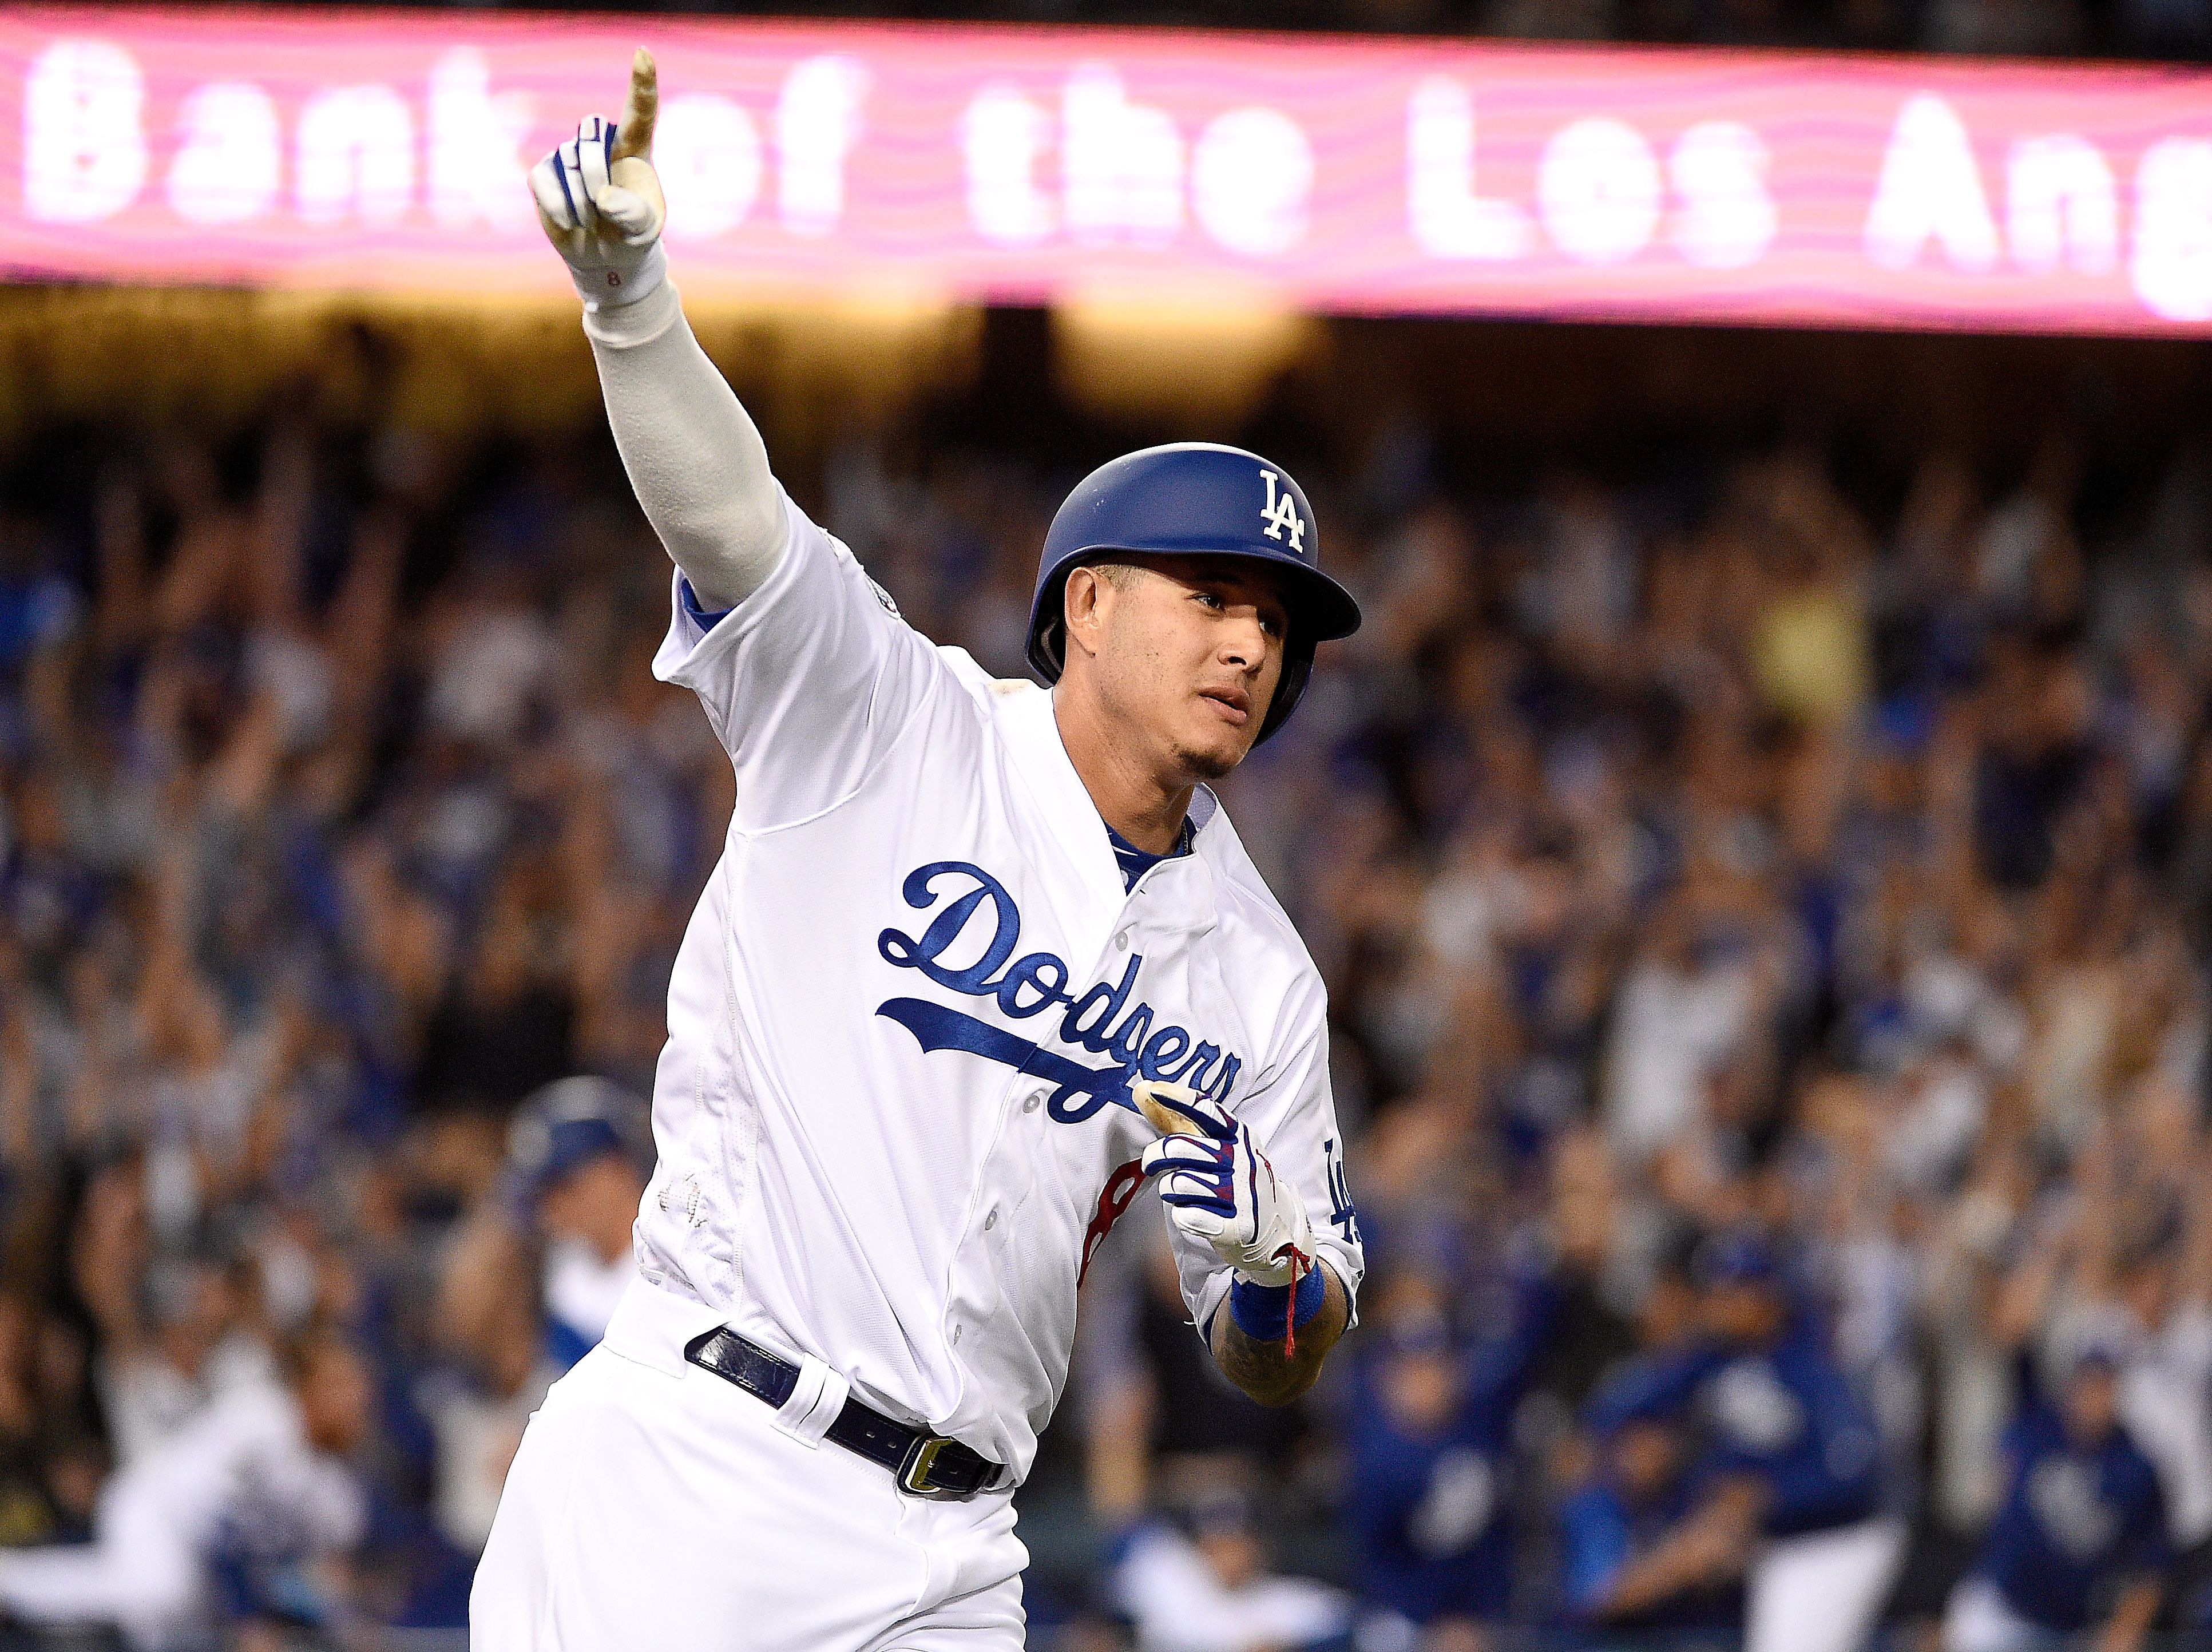 The Dodgers have agreed to a one-year, major league deal with